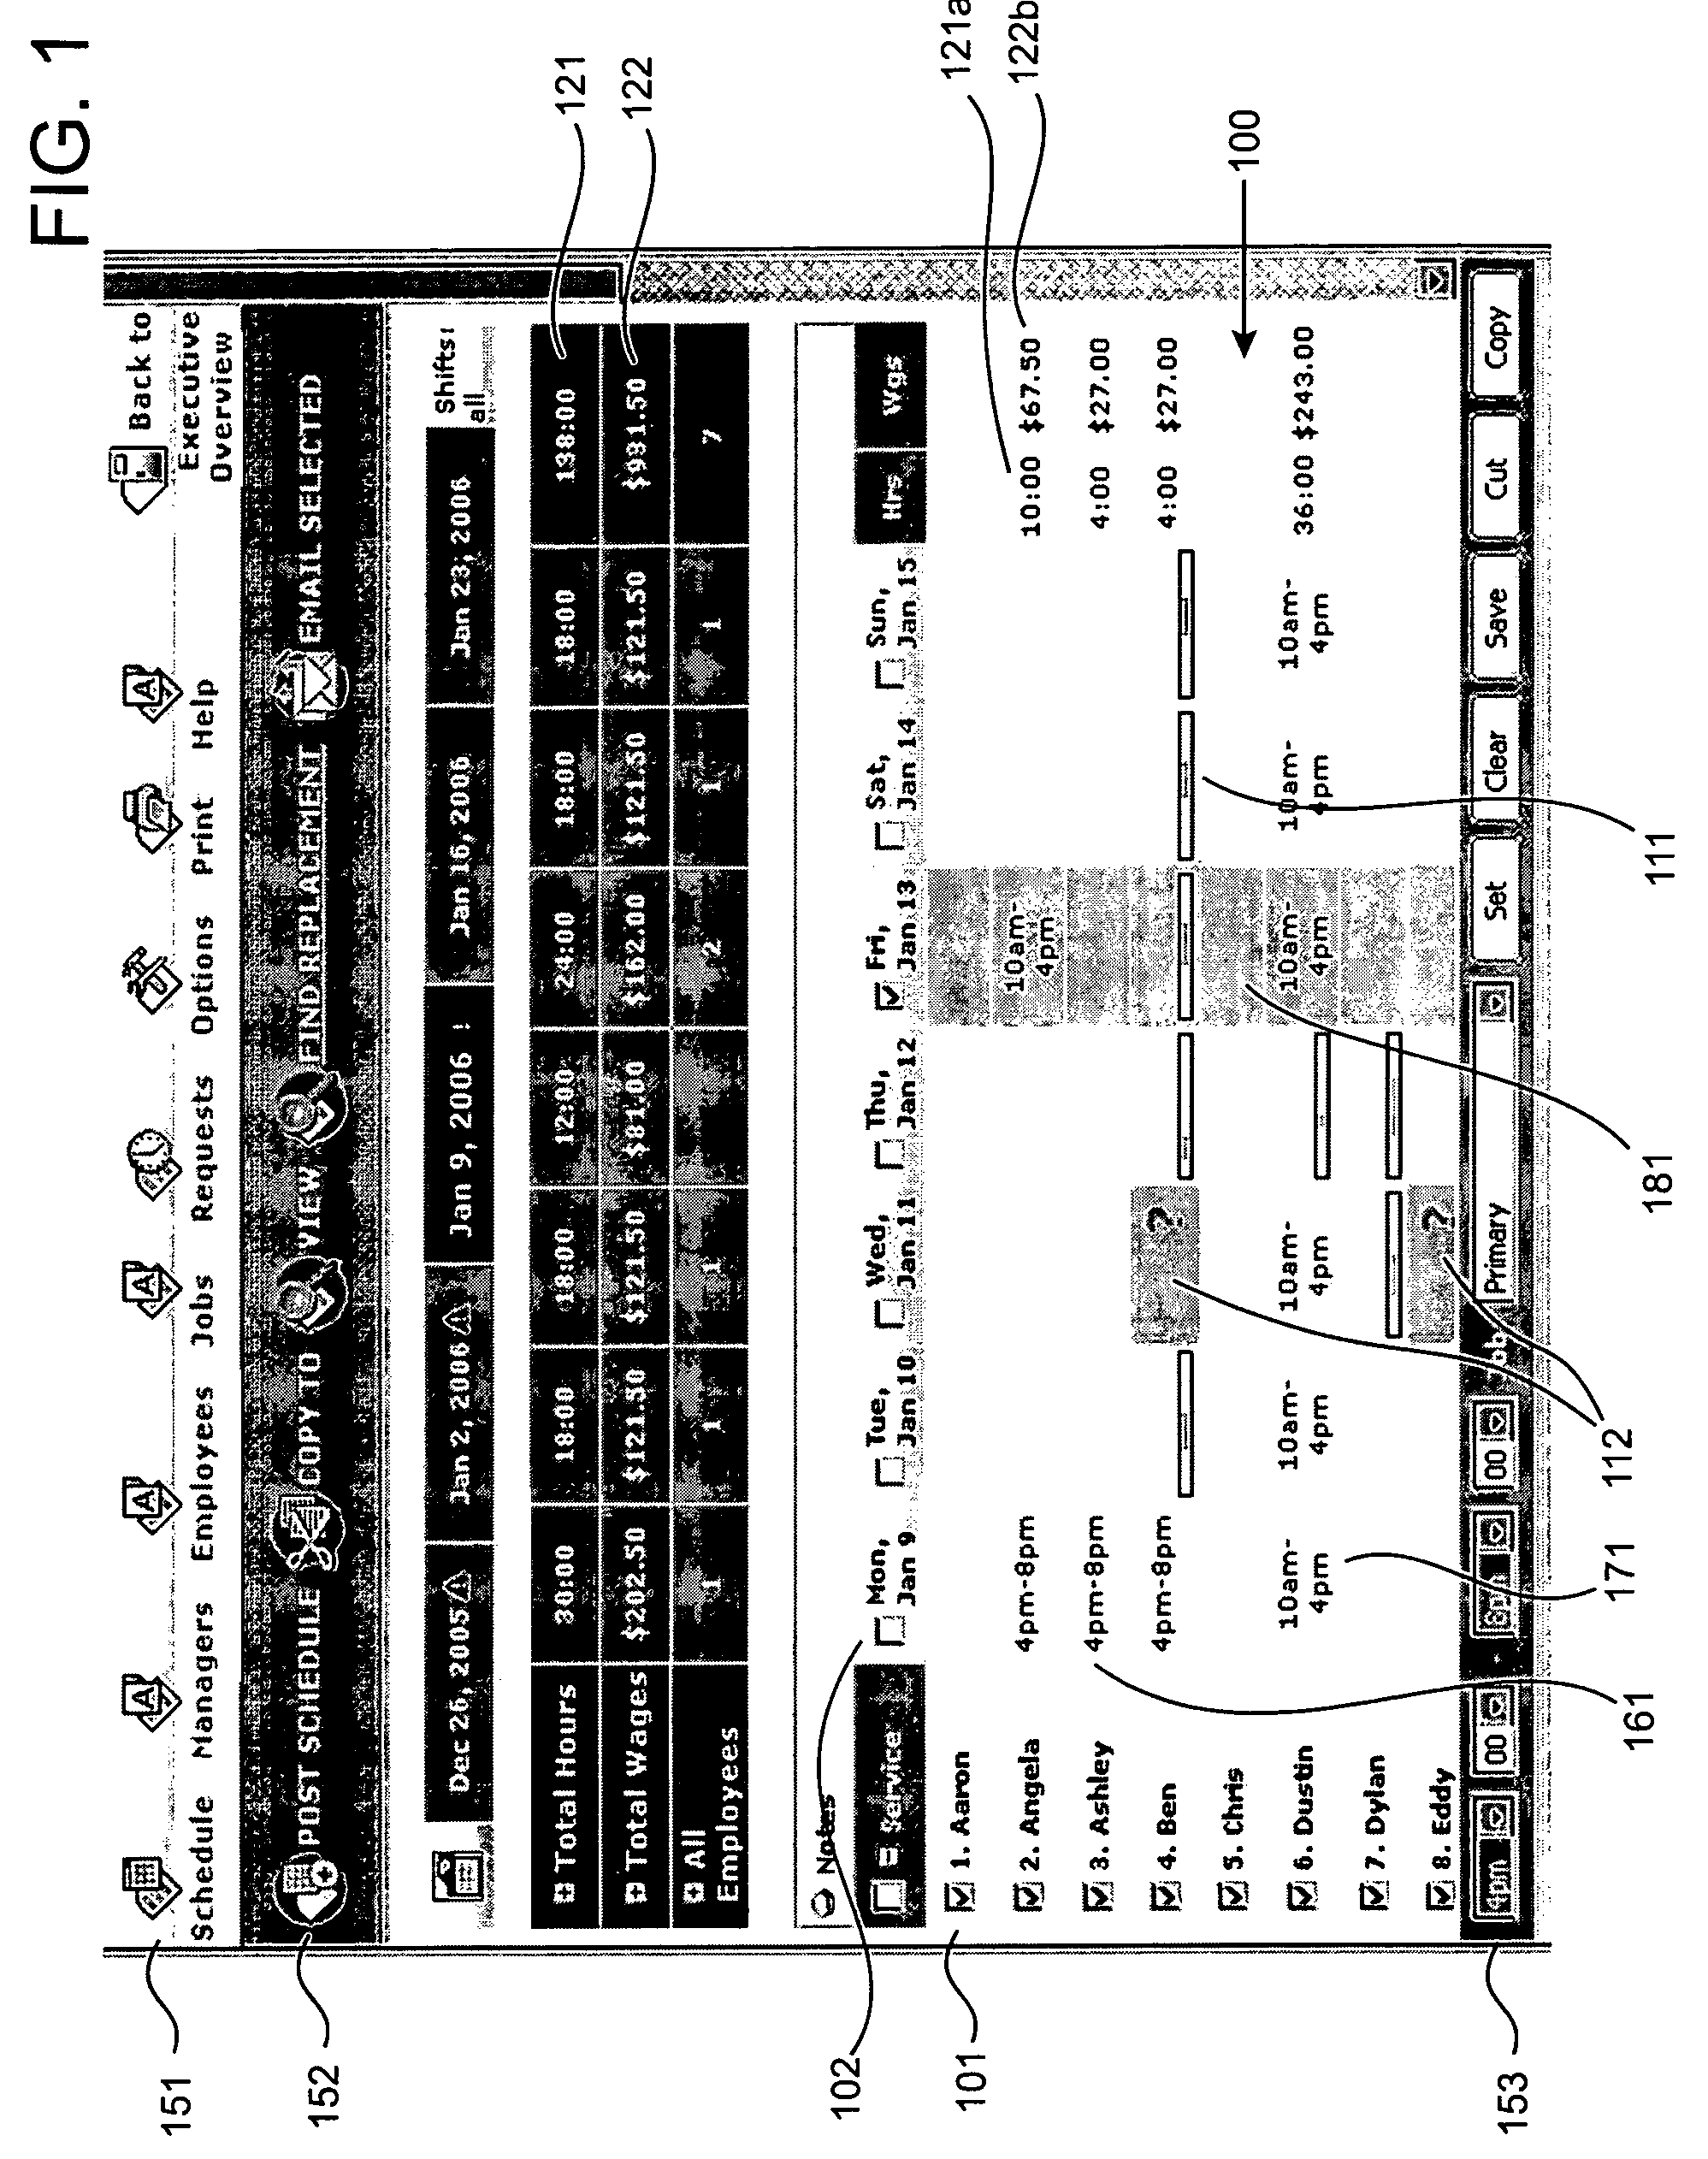 System and method for scheduling employee shifts